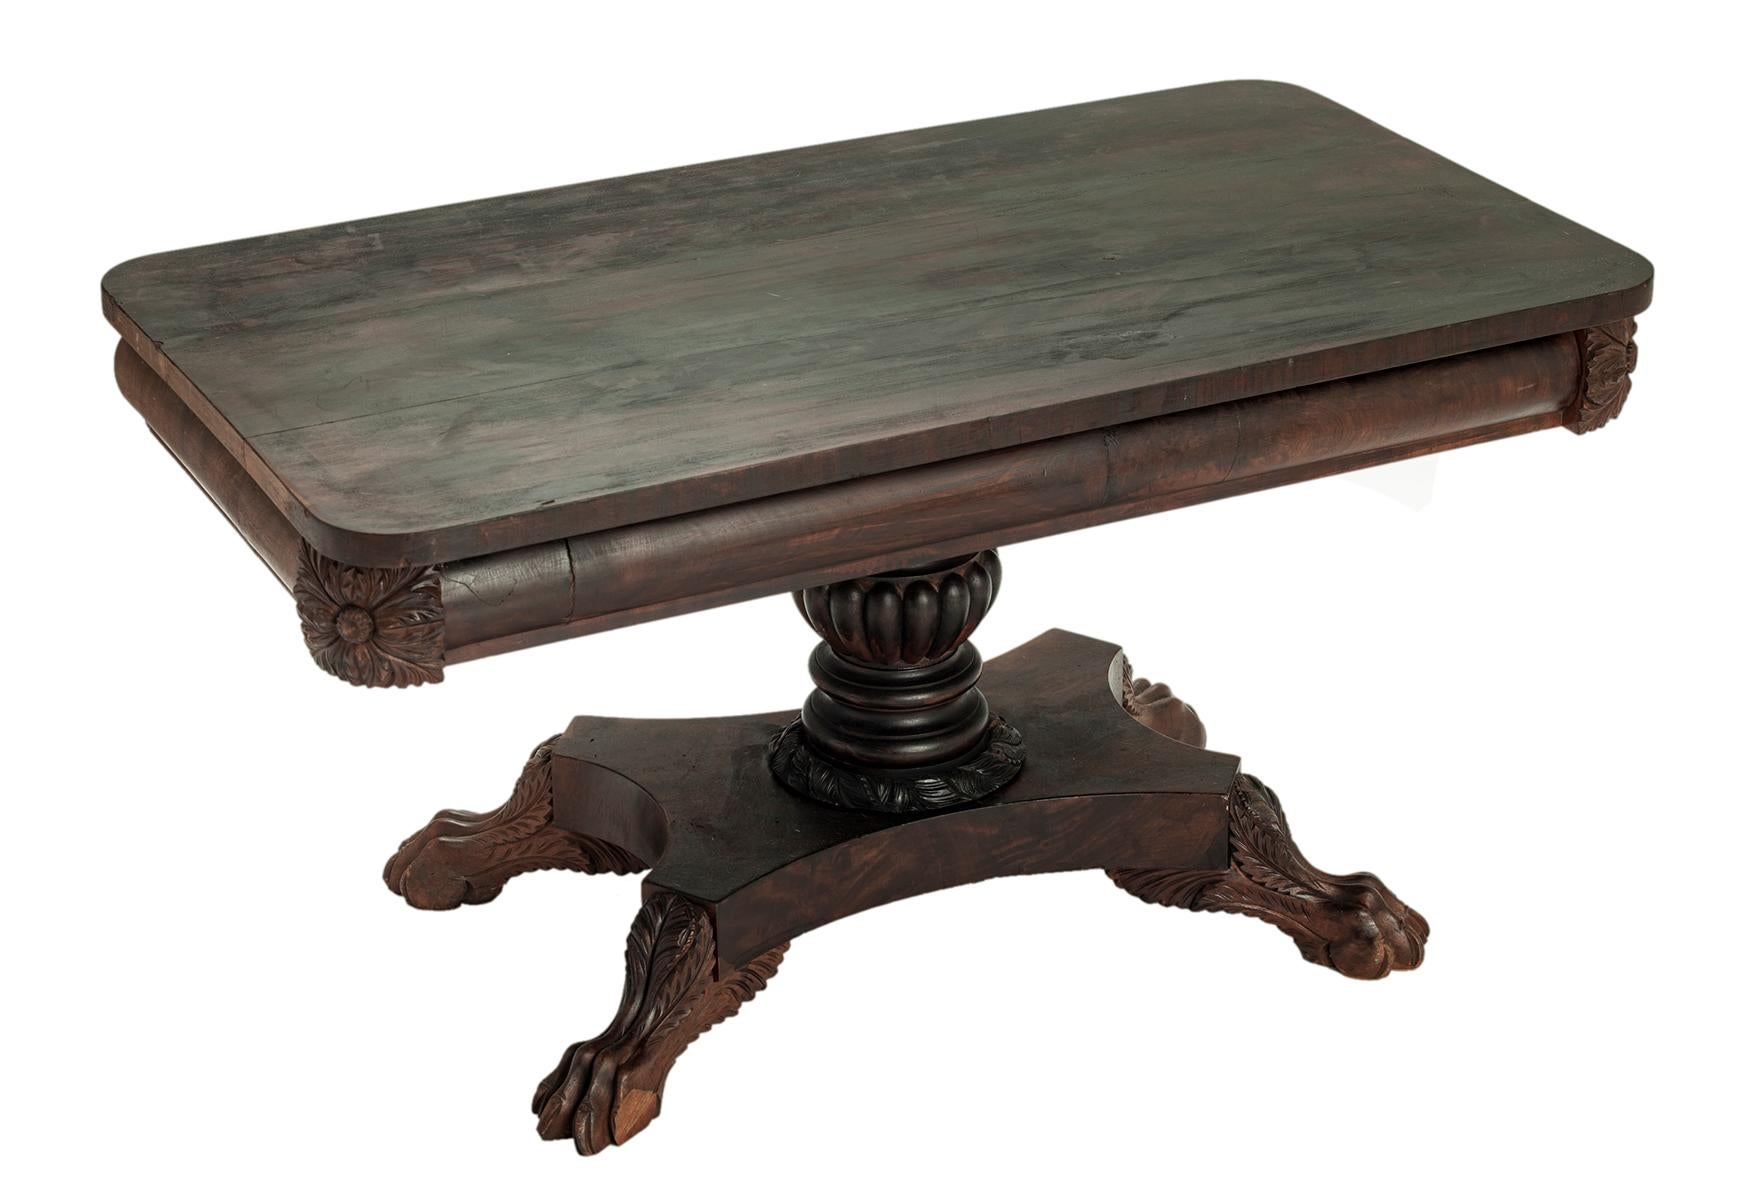 Early 19th Century chippendale coffee table converted from a game table. This antique handcrafted table is the perfect size for small spaces. Hand carved lion paw feet om a pedestal of dark mahogany with an ebony wash over dark reddish brown.